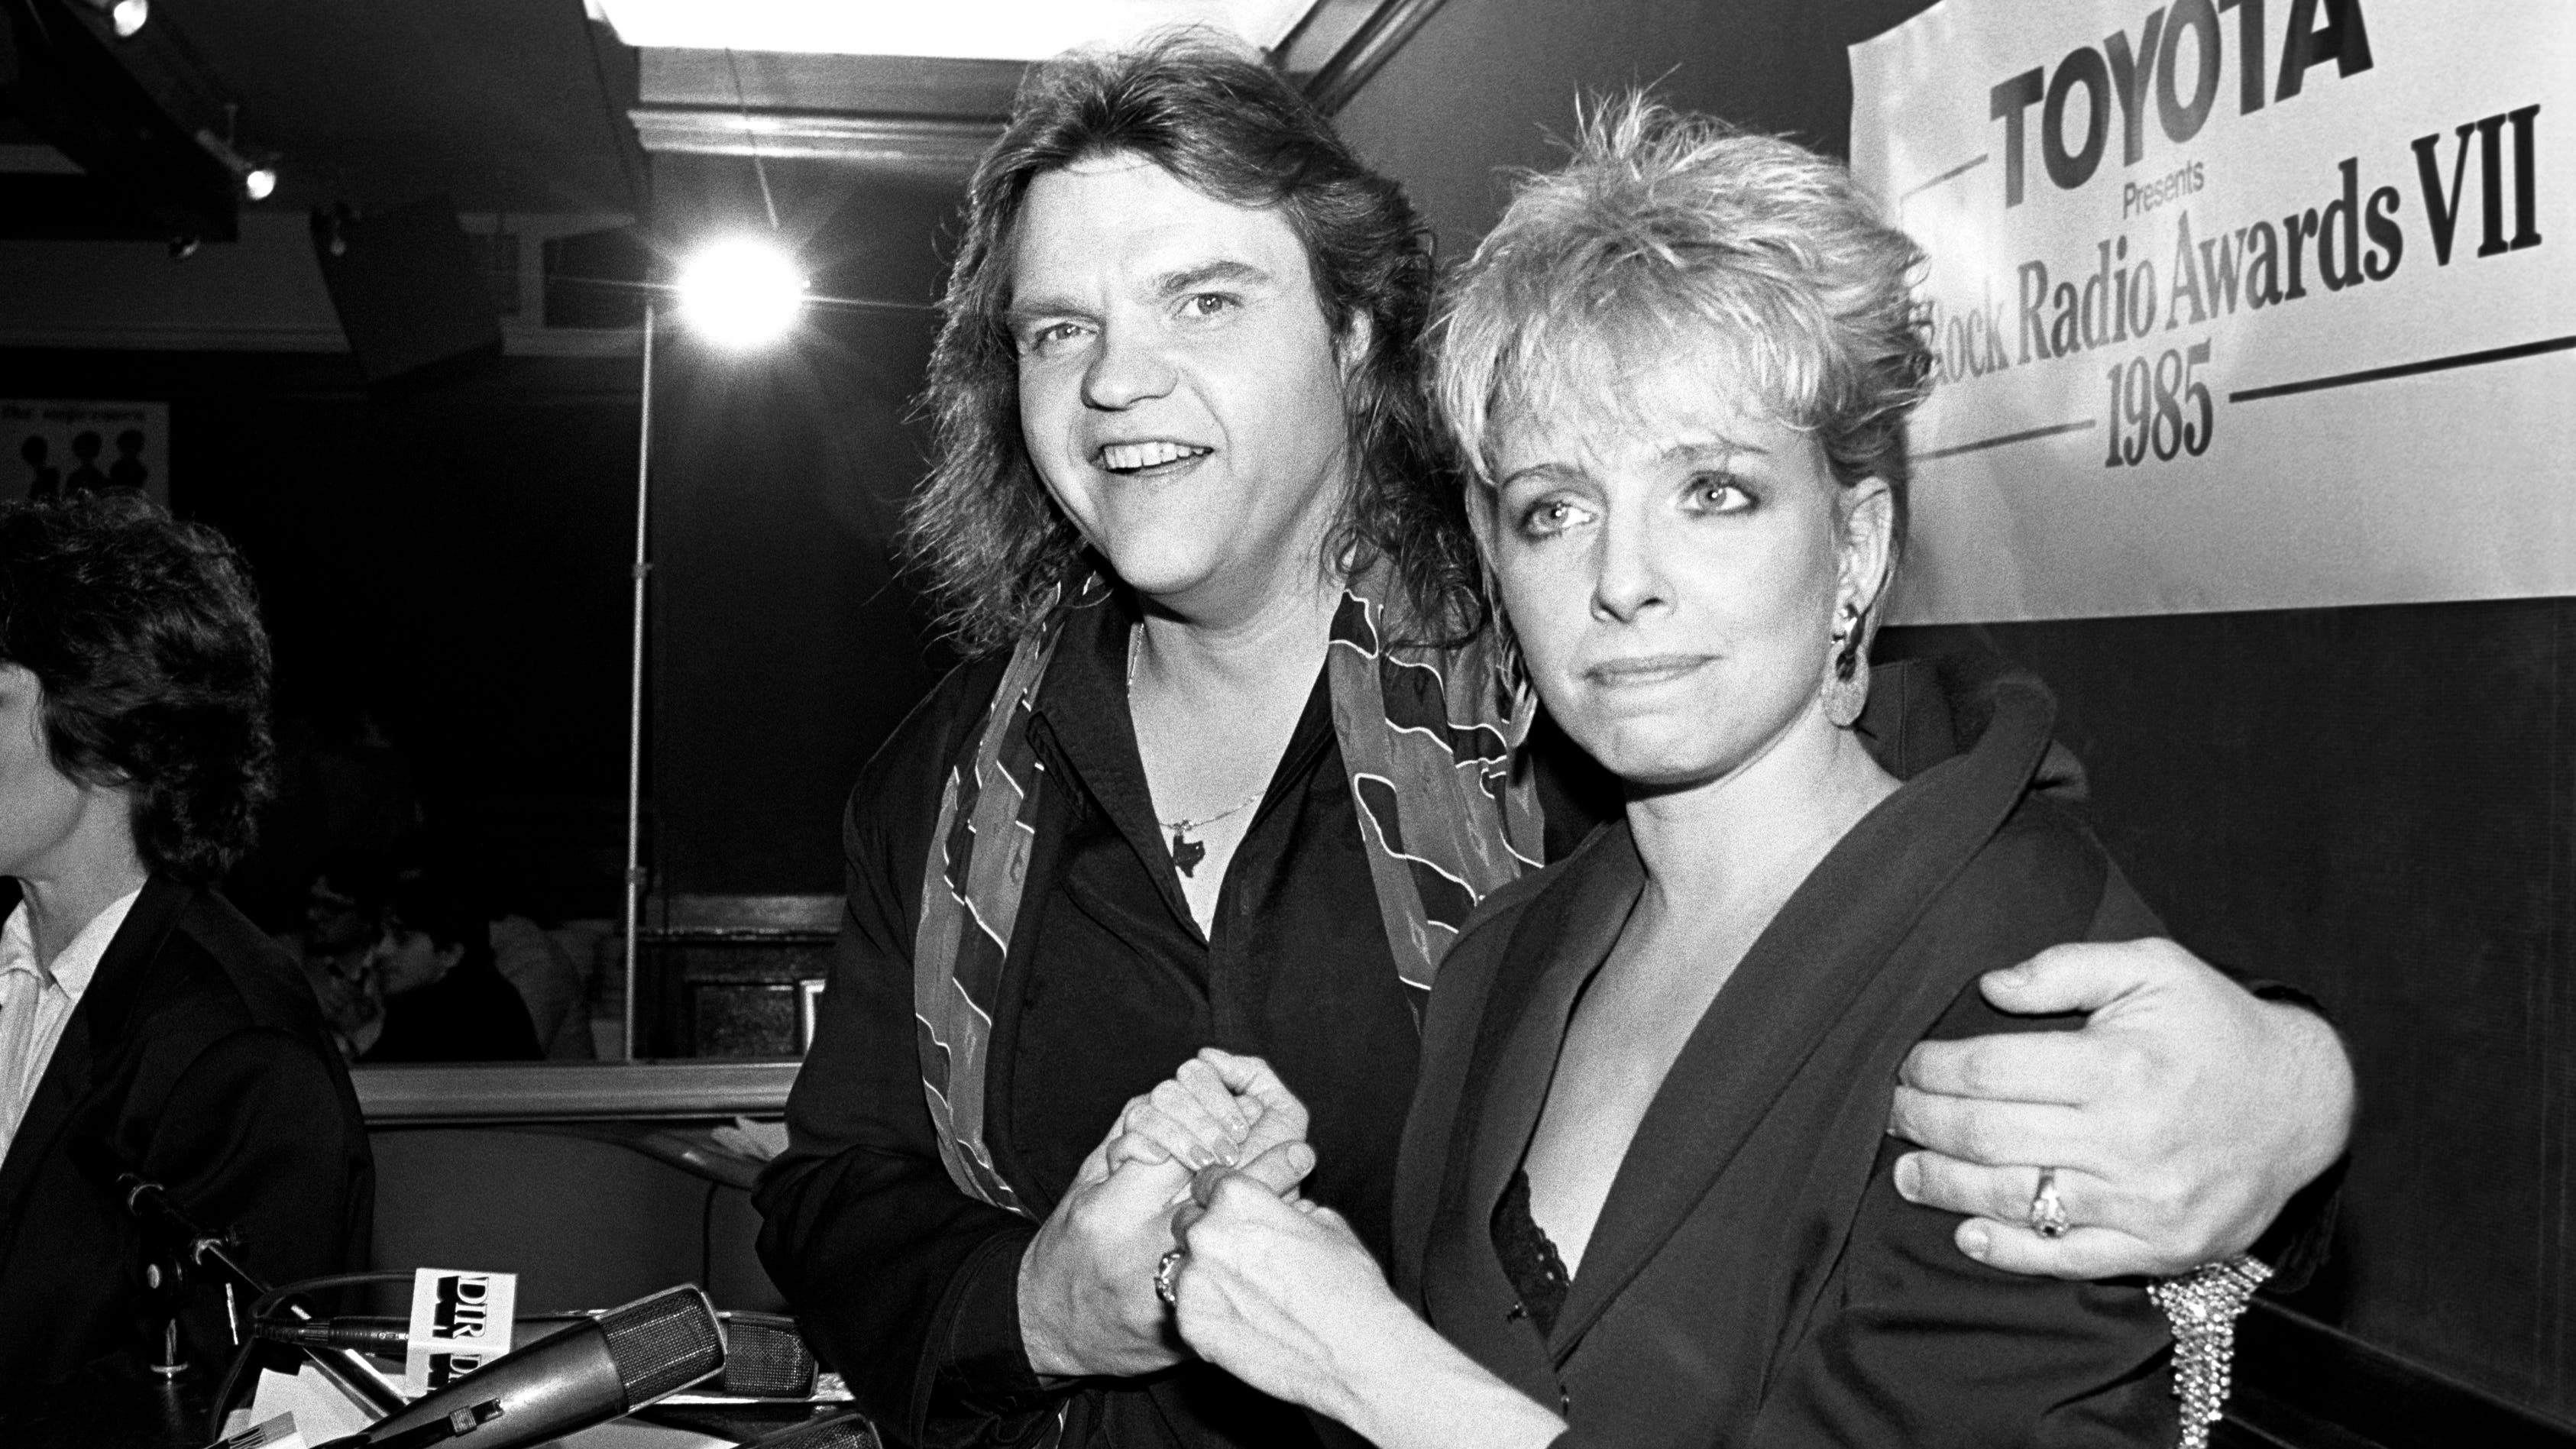 Ellen Foley recalls her epic duet with Meat Loaf: ‘Stop right there!’